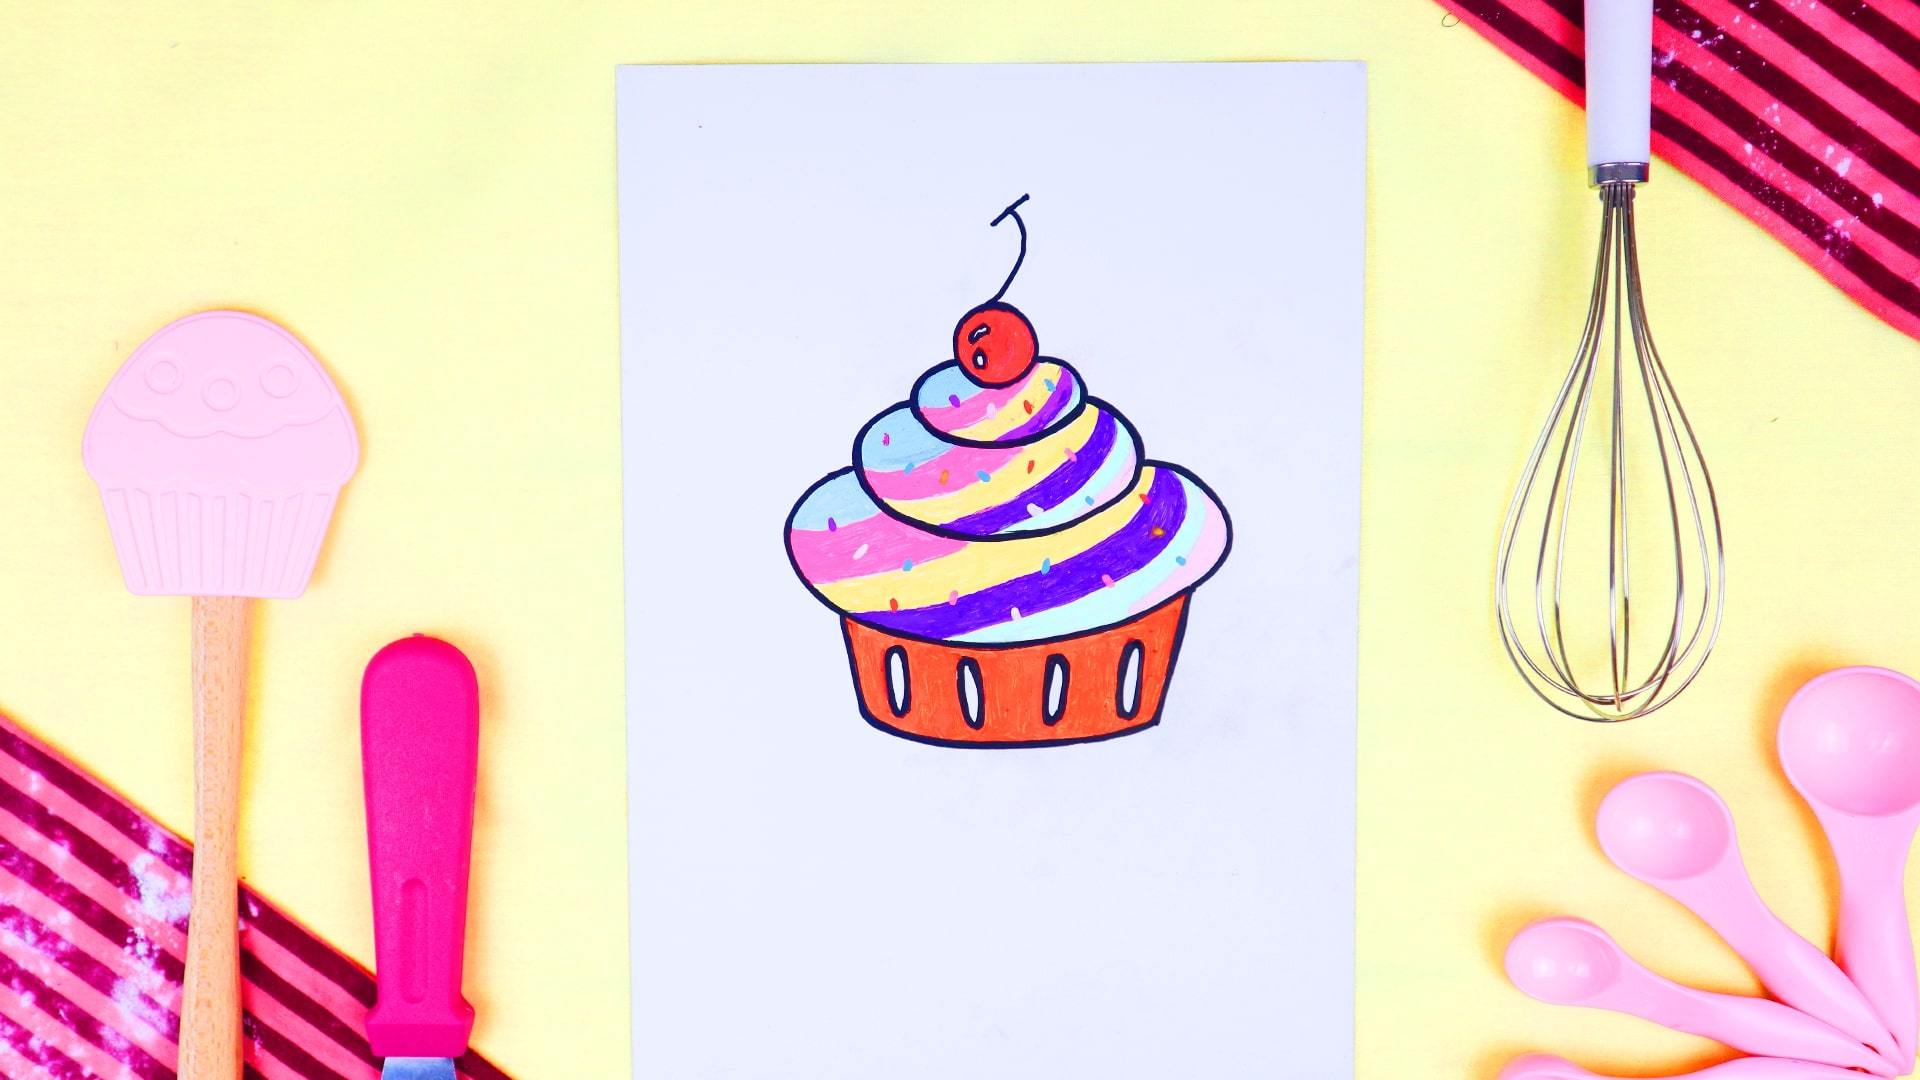 HOW TO: Draw a Cupcake (for Beginners)